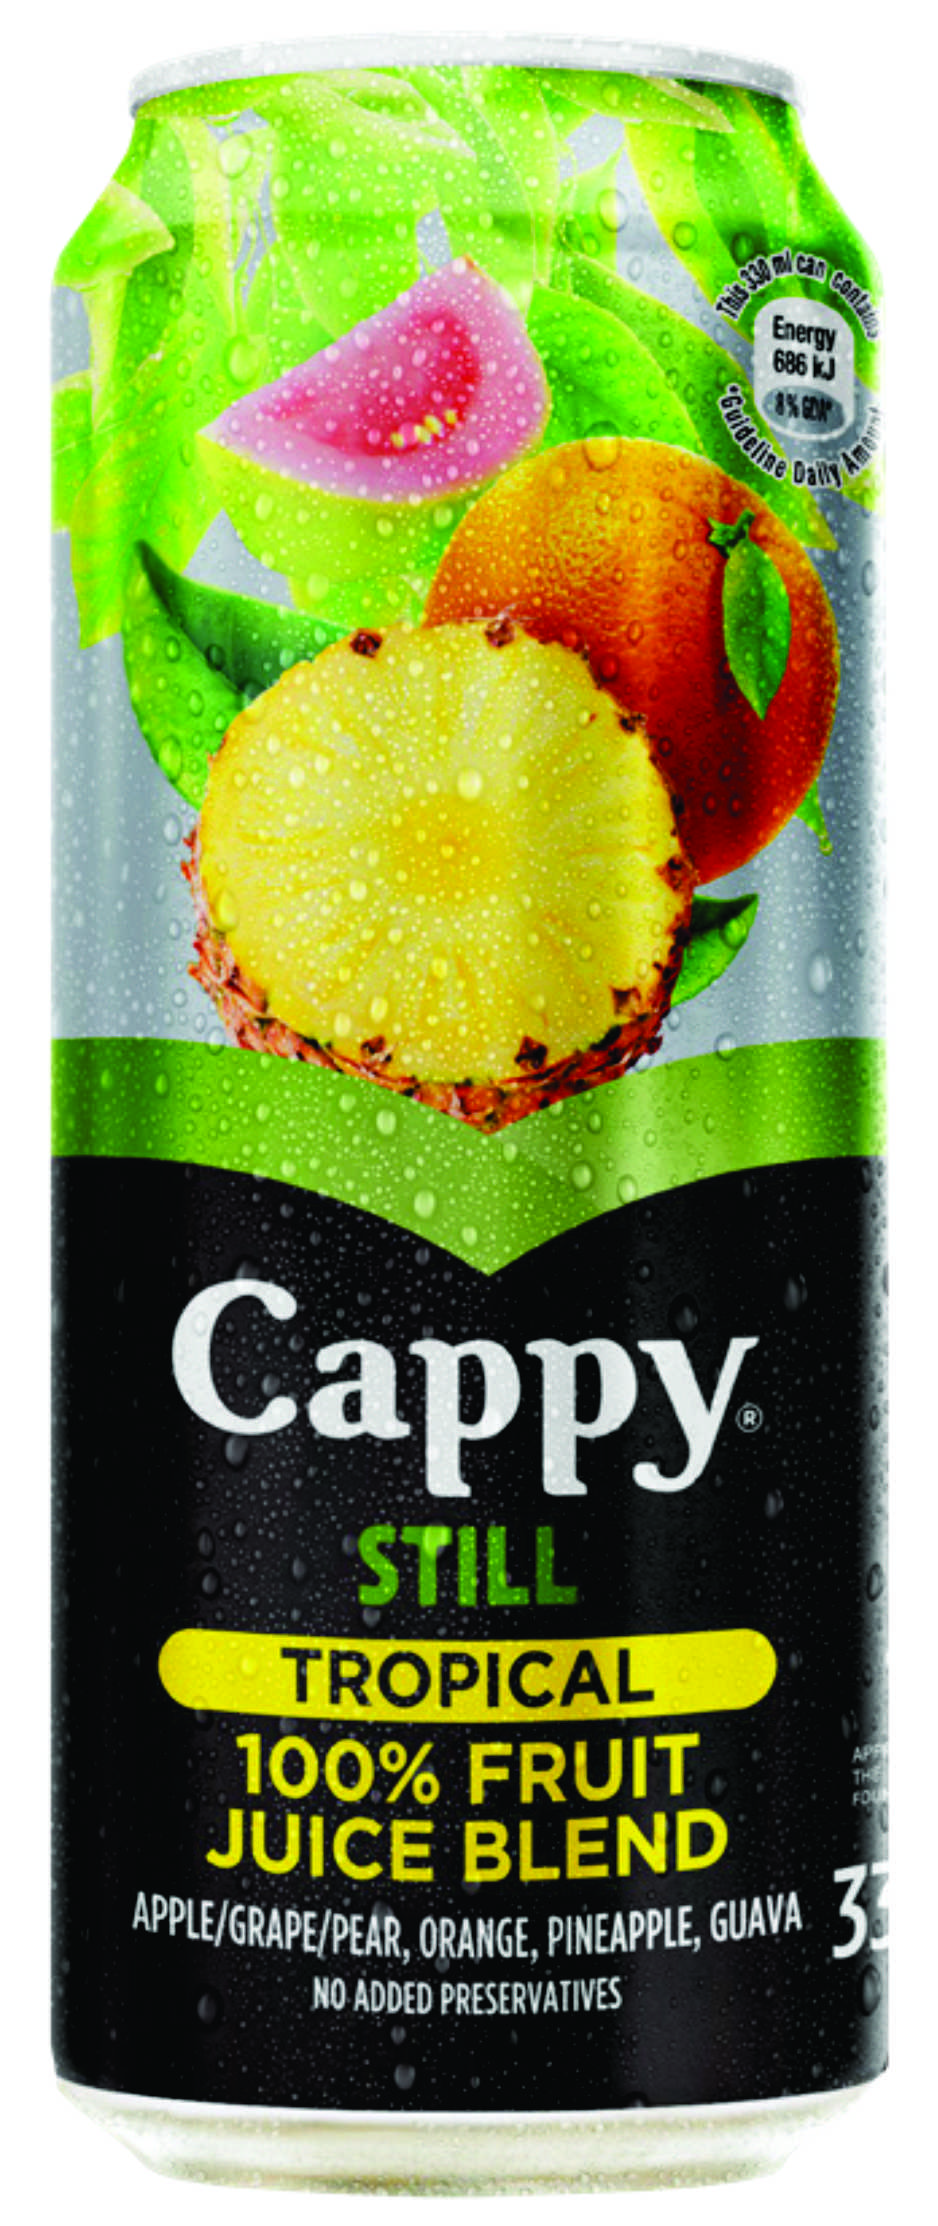 Cappy Tropical